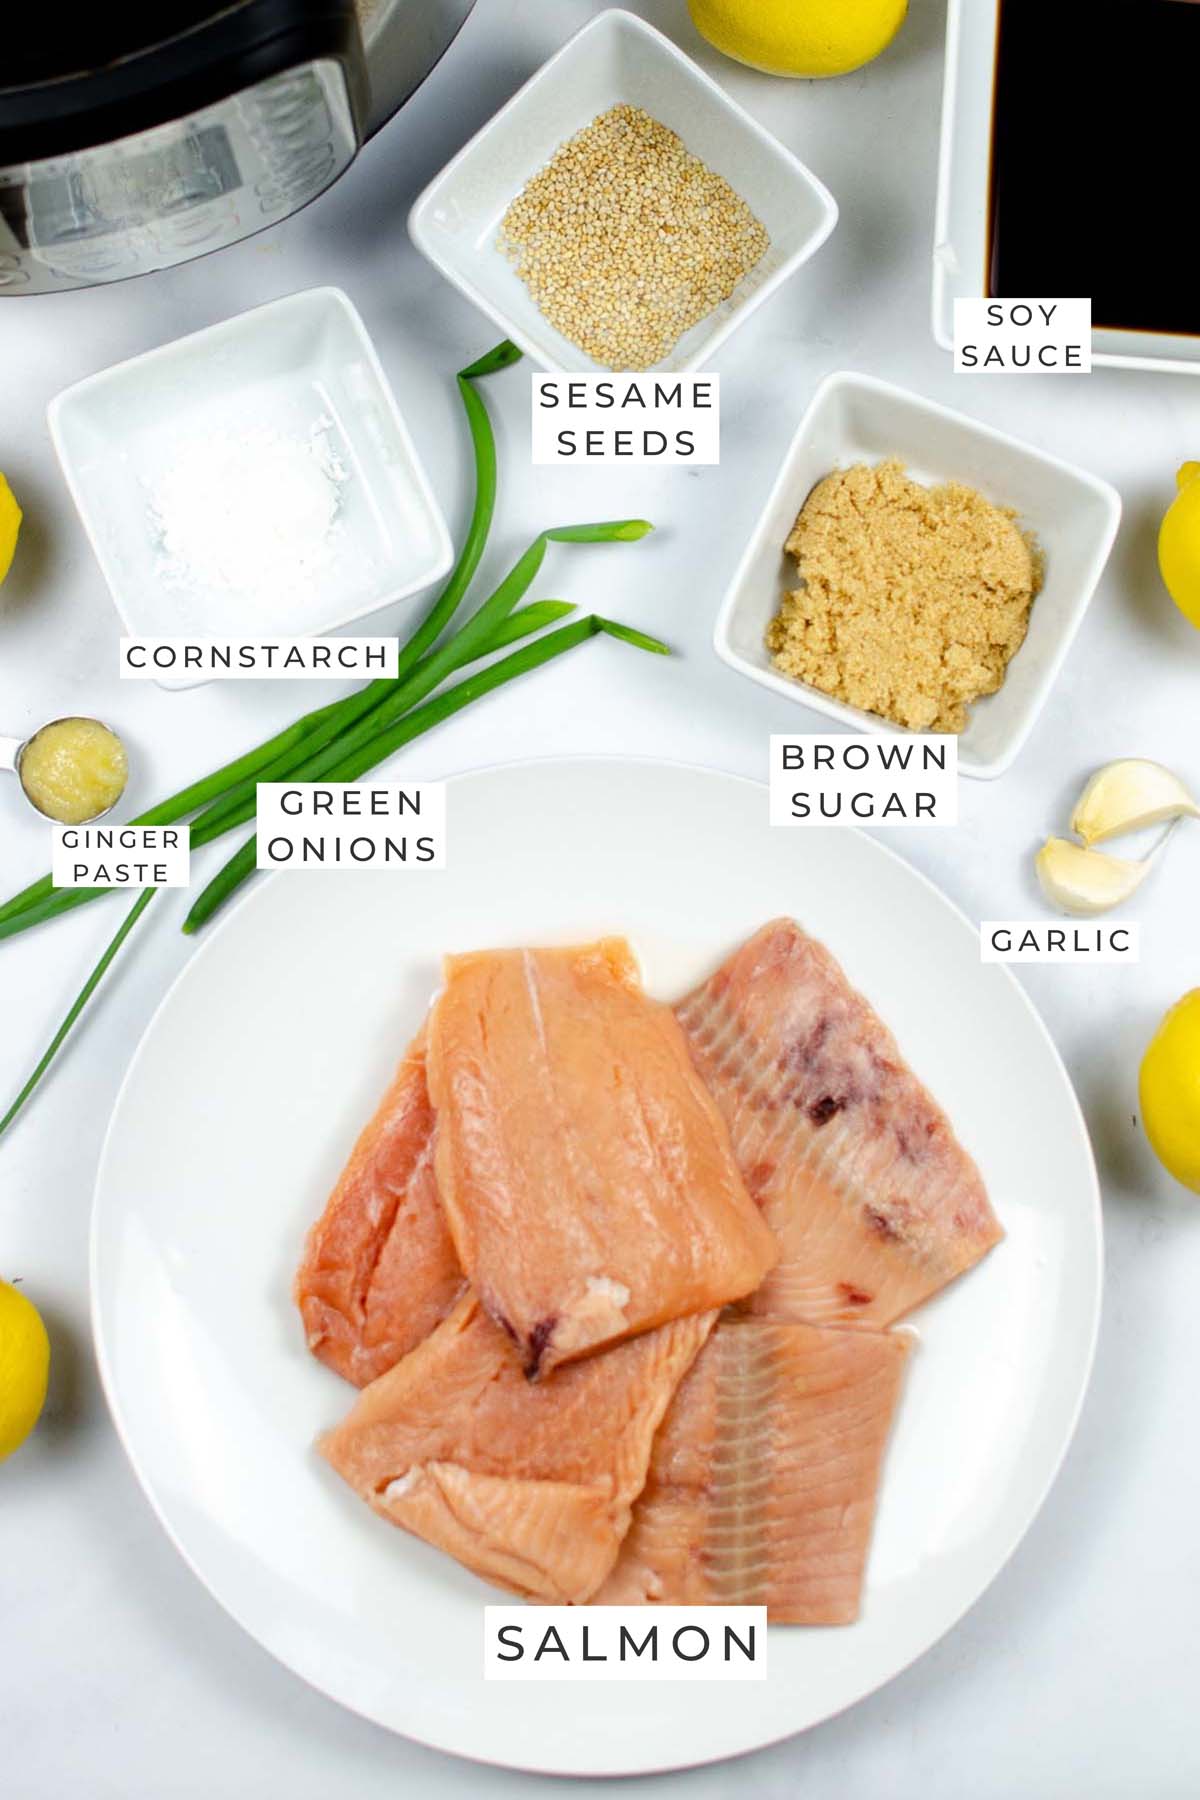 Labeled ingredients for the teriyaki salmon.